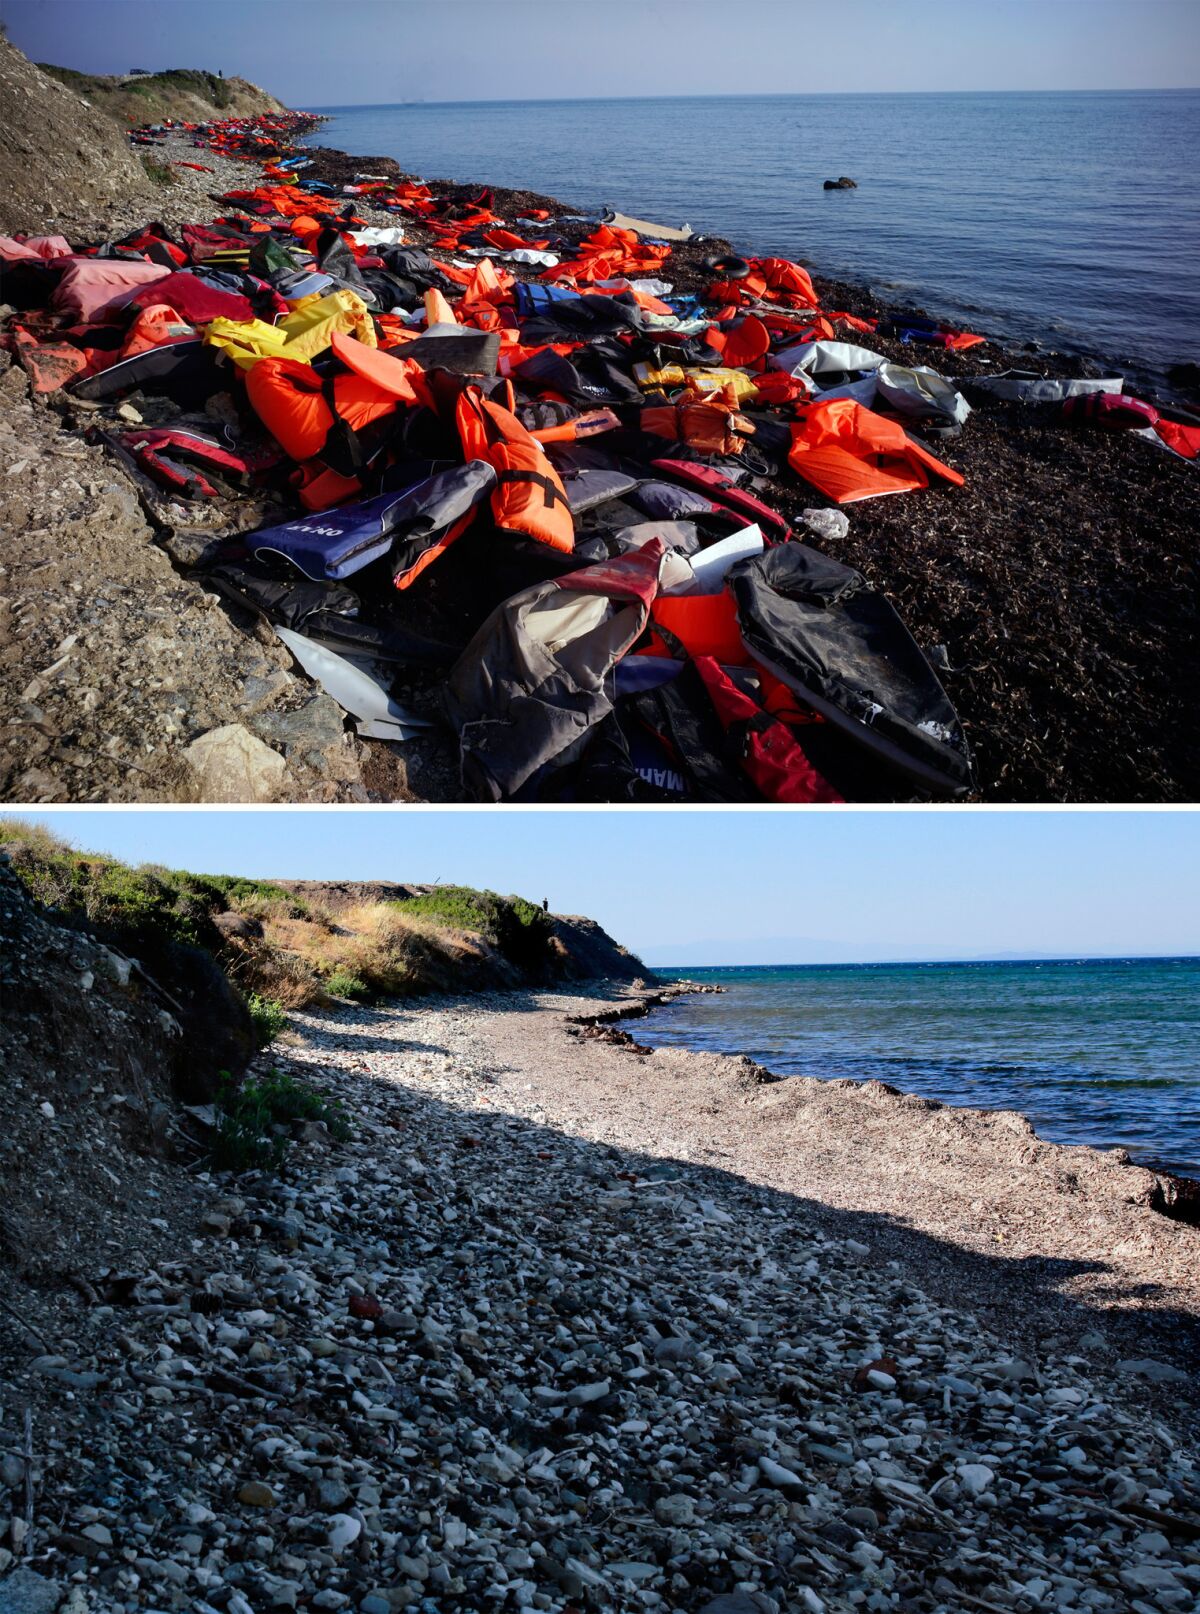 A composite image shows a key location during the height of the 2015 migrant crisis last year and the situation there now.